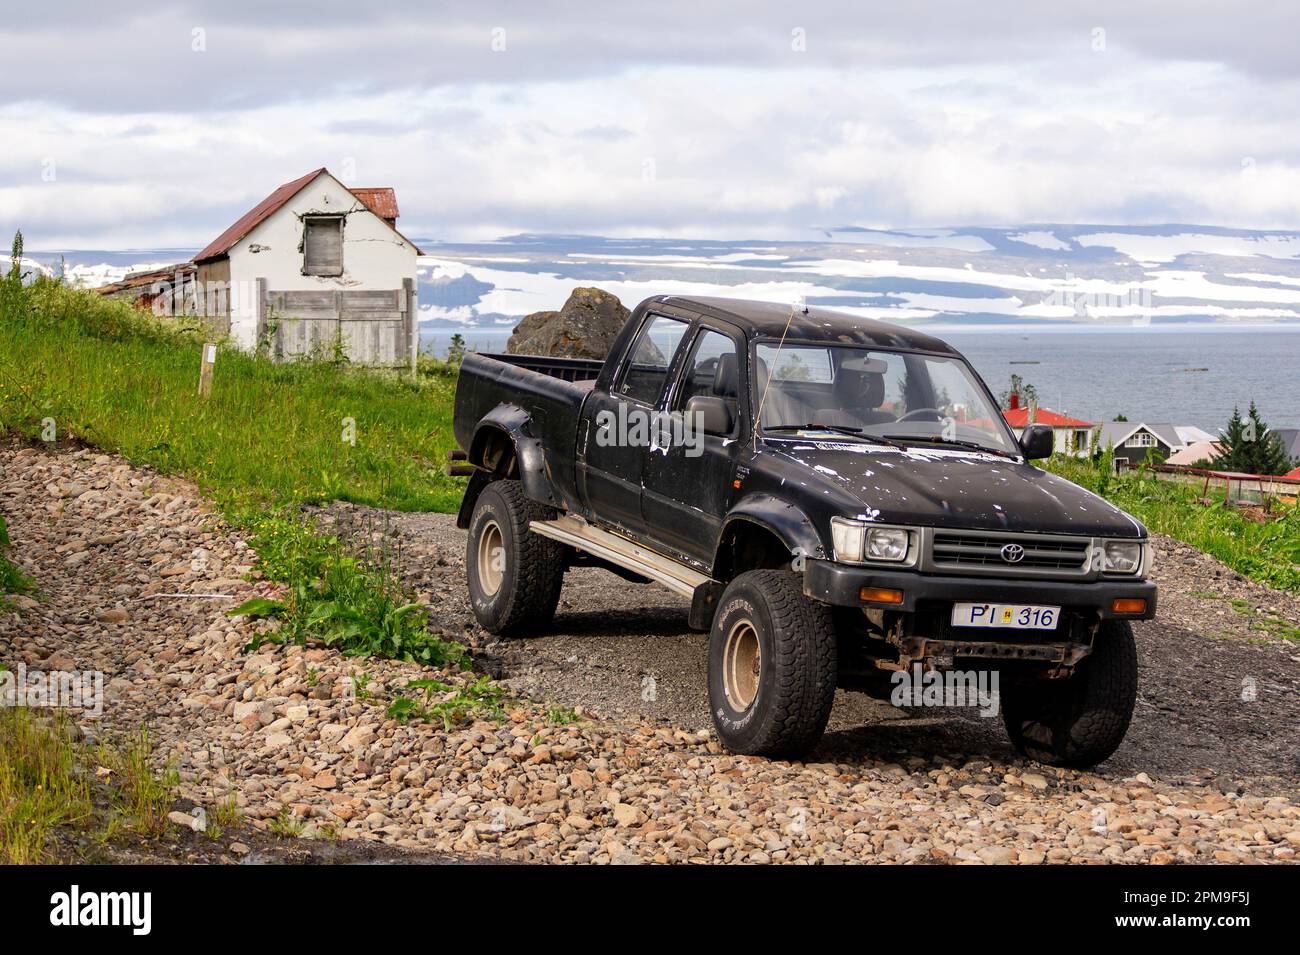 ISAFJORDUR, ICELAND - JULY 7, 2014: Black Toyota Hilux 2.4D pickup with huge tyres ready for adventure in Icelandic landscape Stock Photo